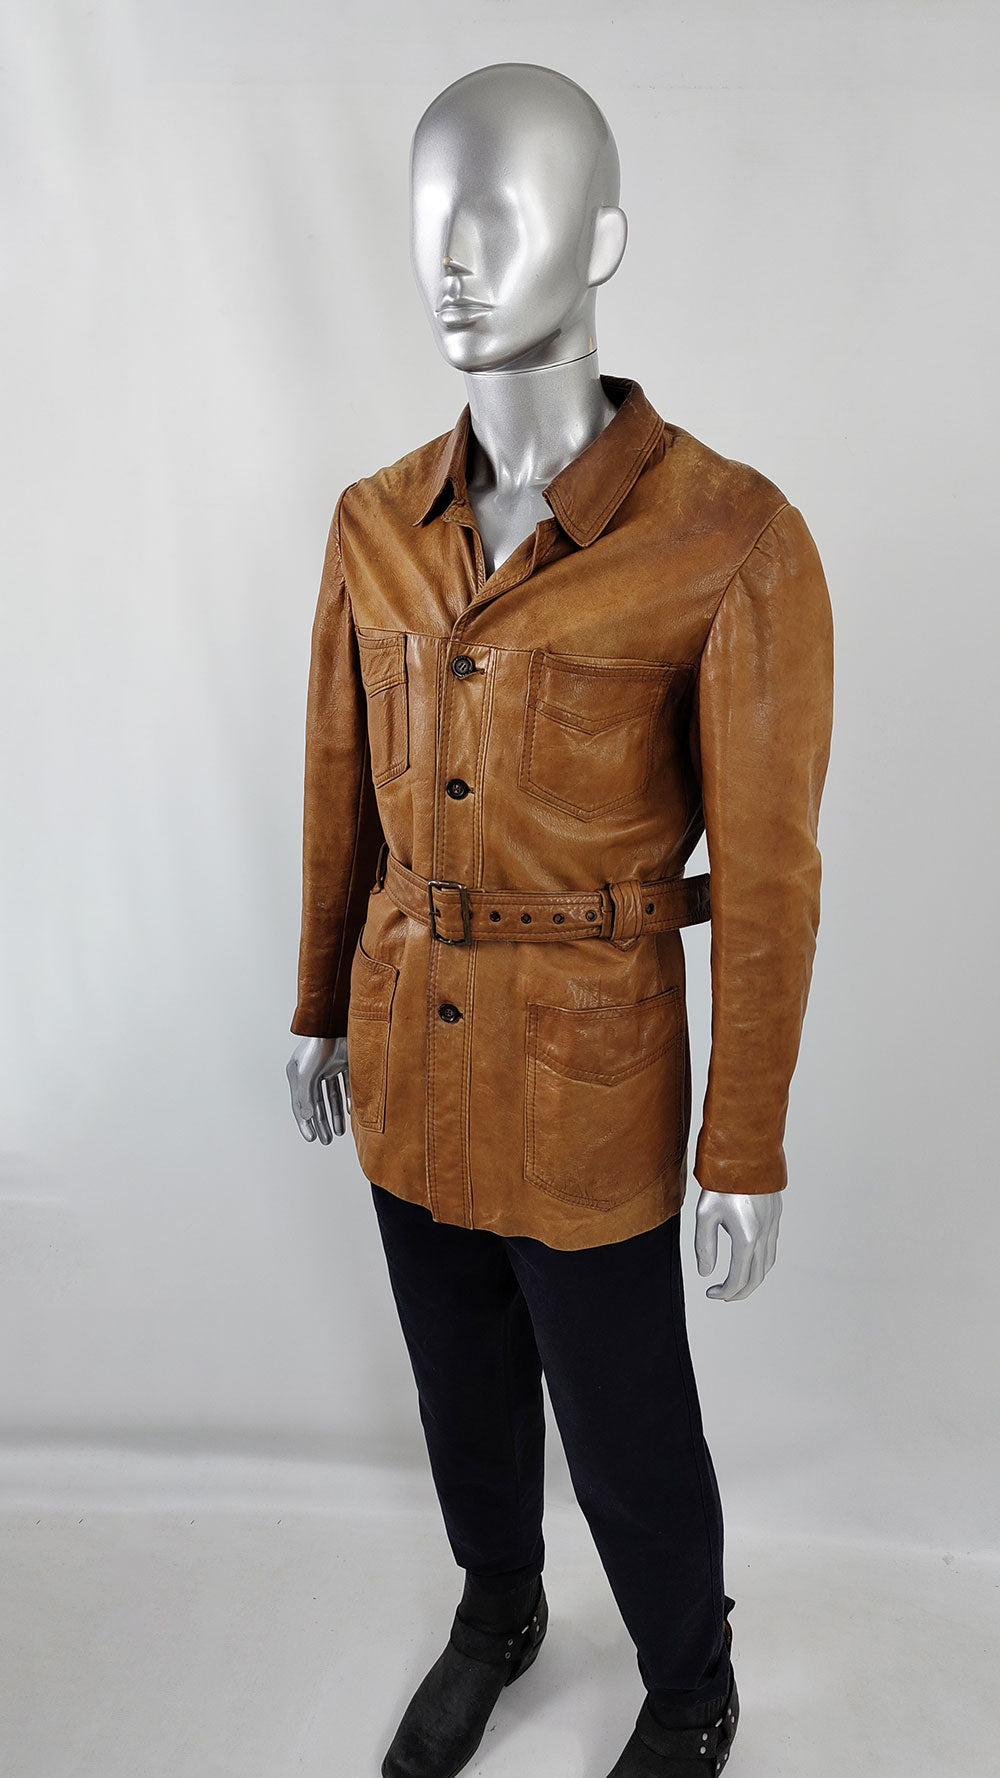 are and collectible vintage leather jacket with a matching belt and patch pockets by Hornes.